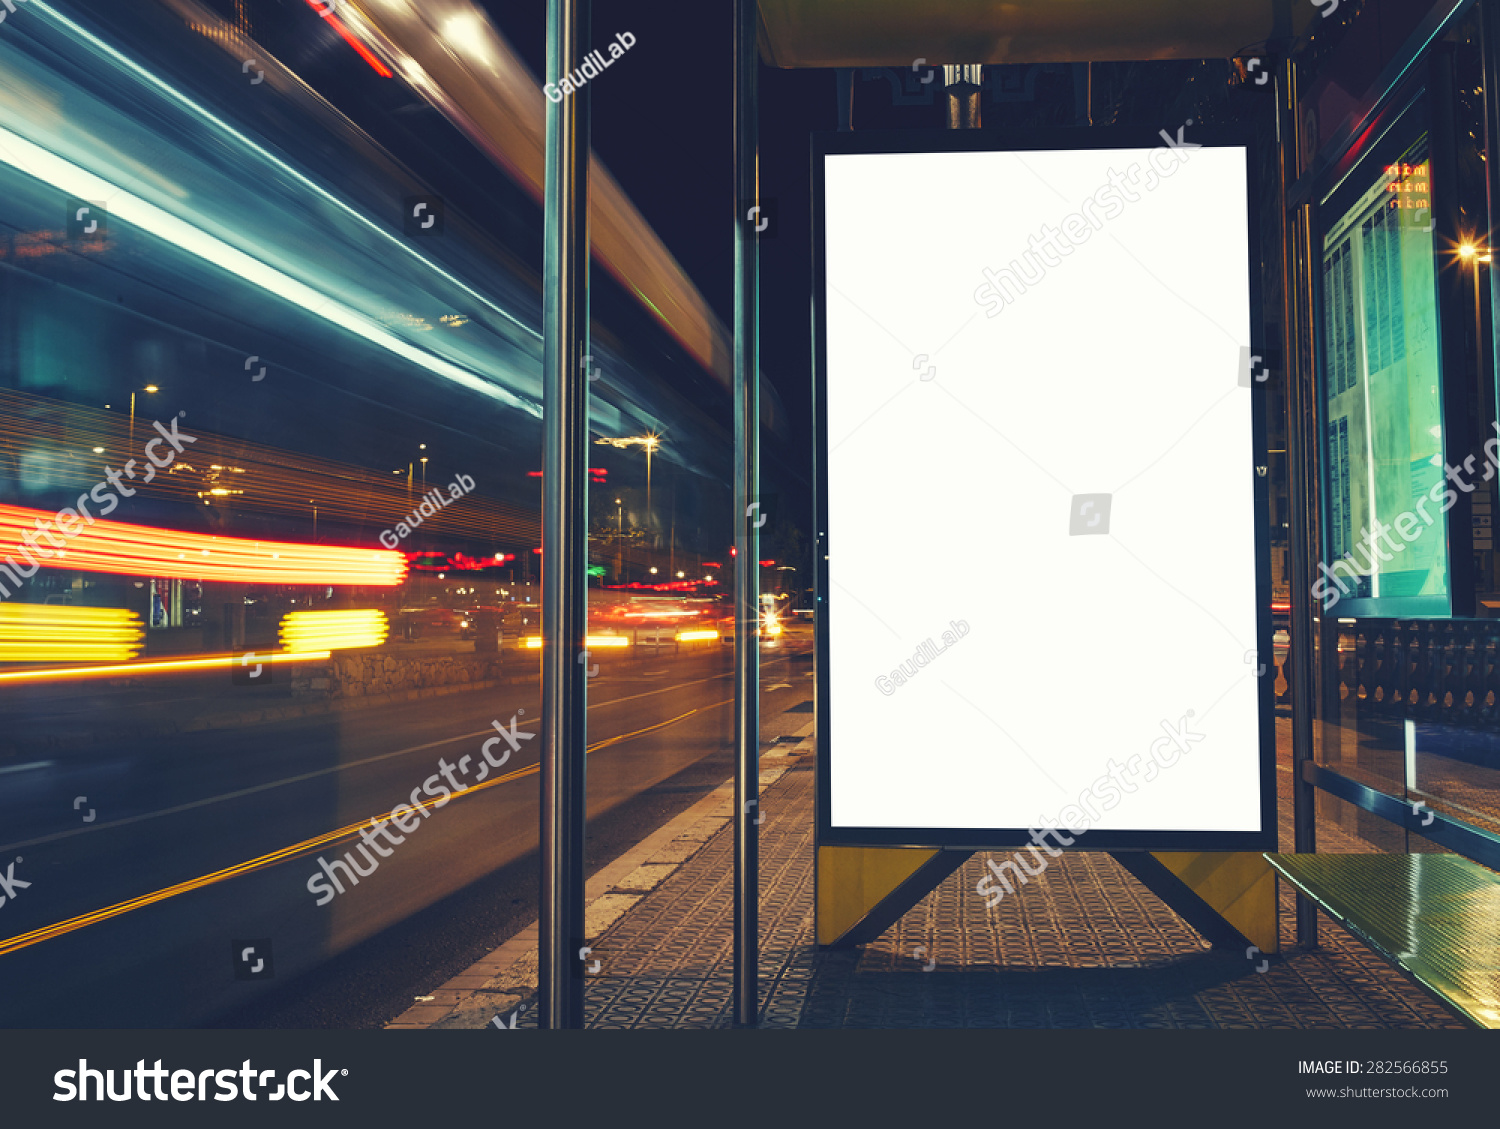 Illuminated blank billboard with copy space for your text message or content, advertising mock up banner of bus station, public information board with blurred vehicles in high speed in night city #282566855